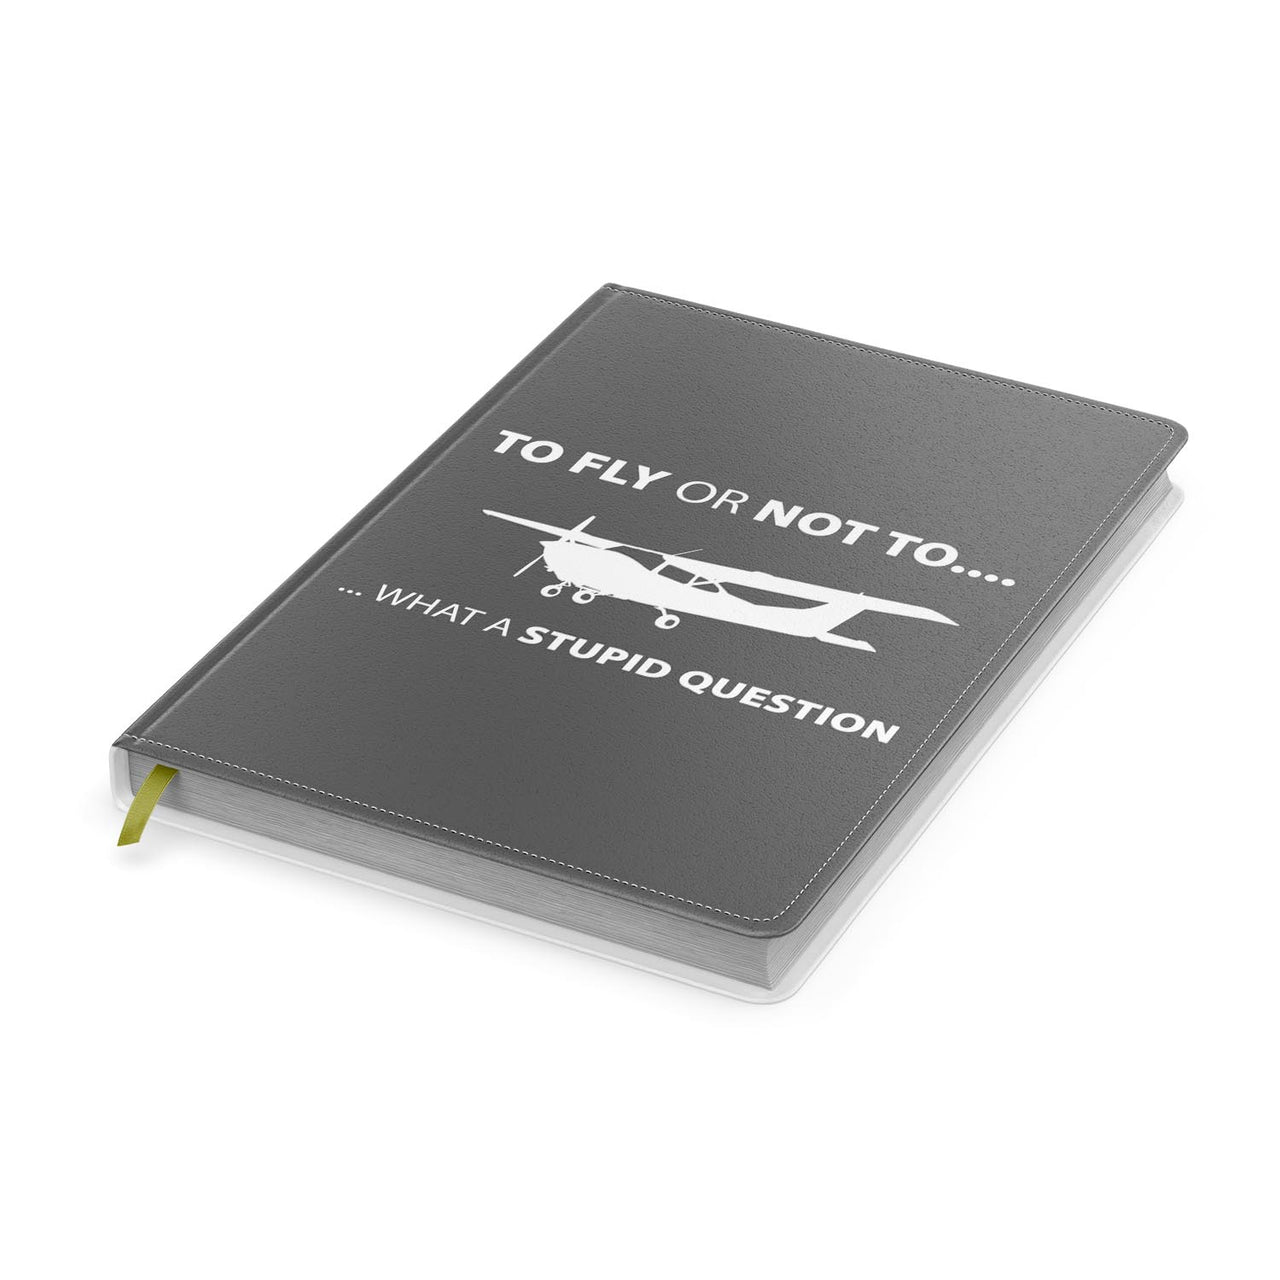 To Fly or Not To What a Stupid Question Designed Notebooks